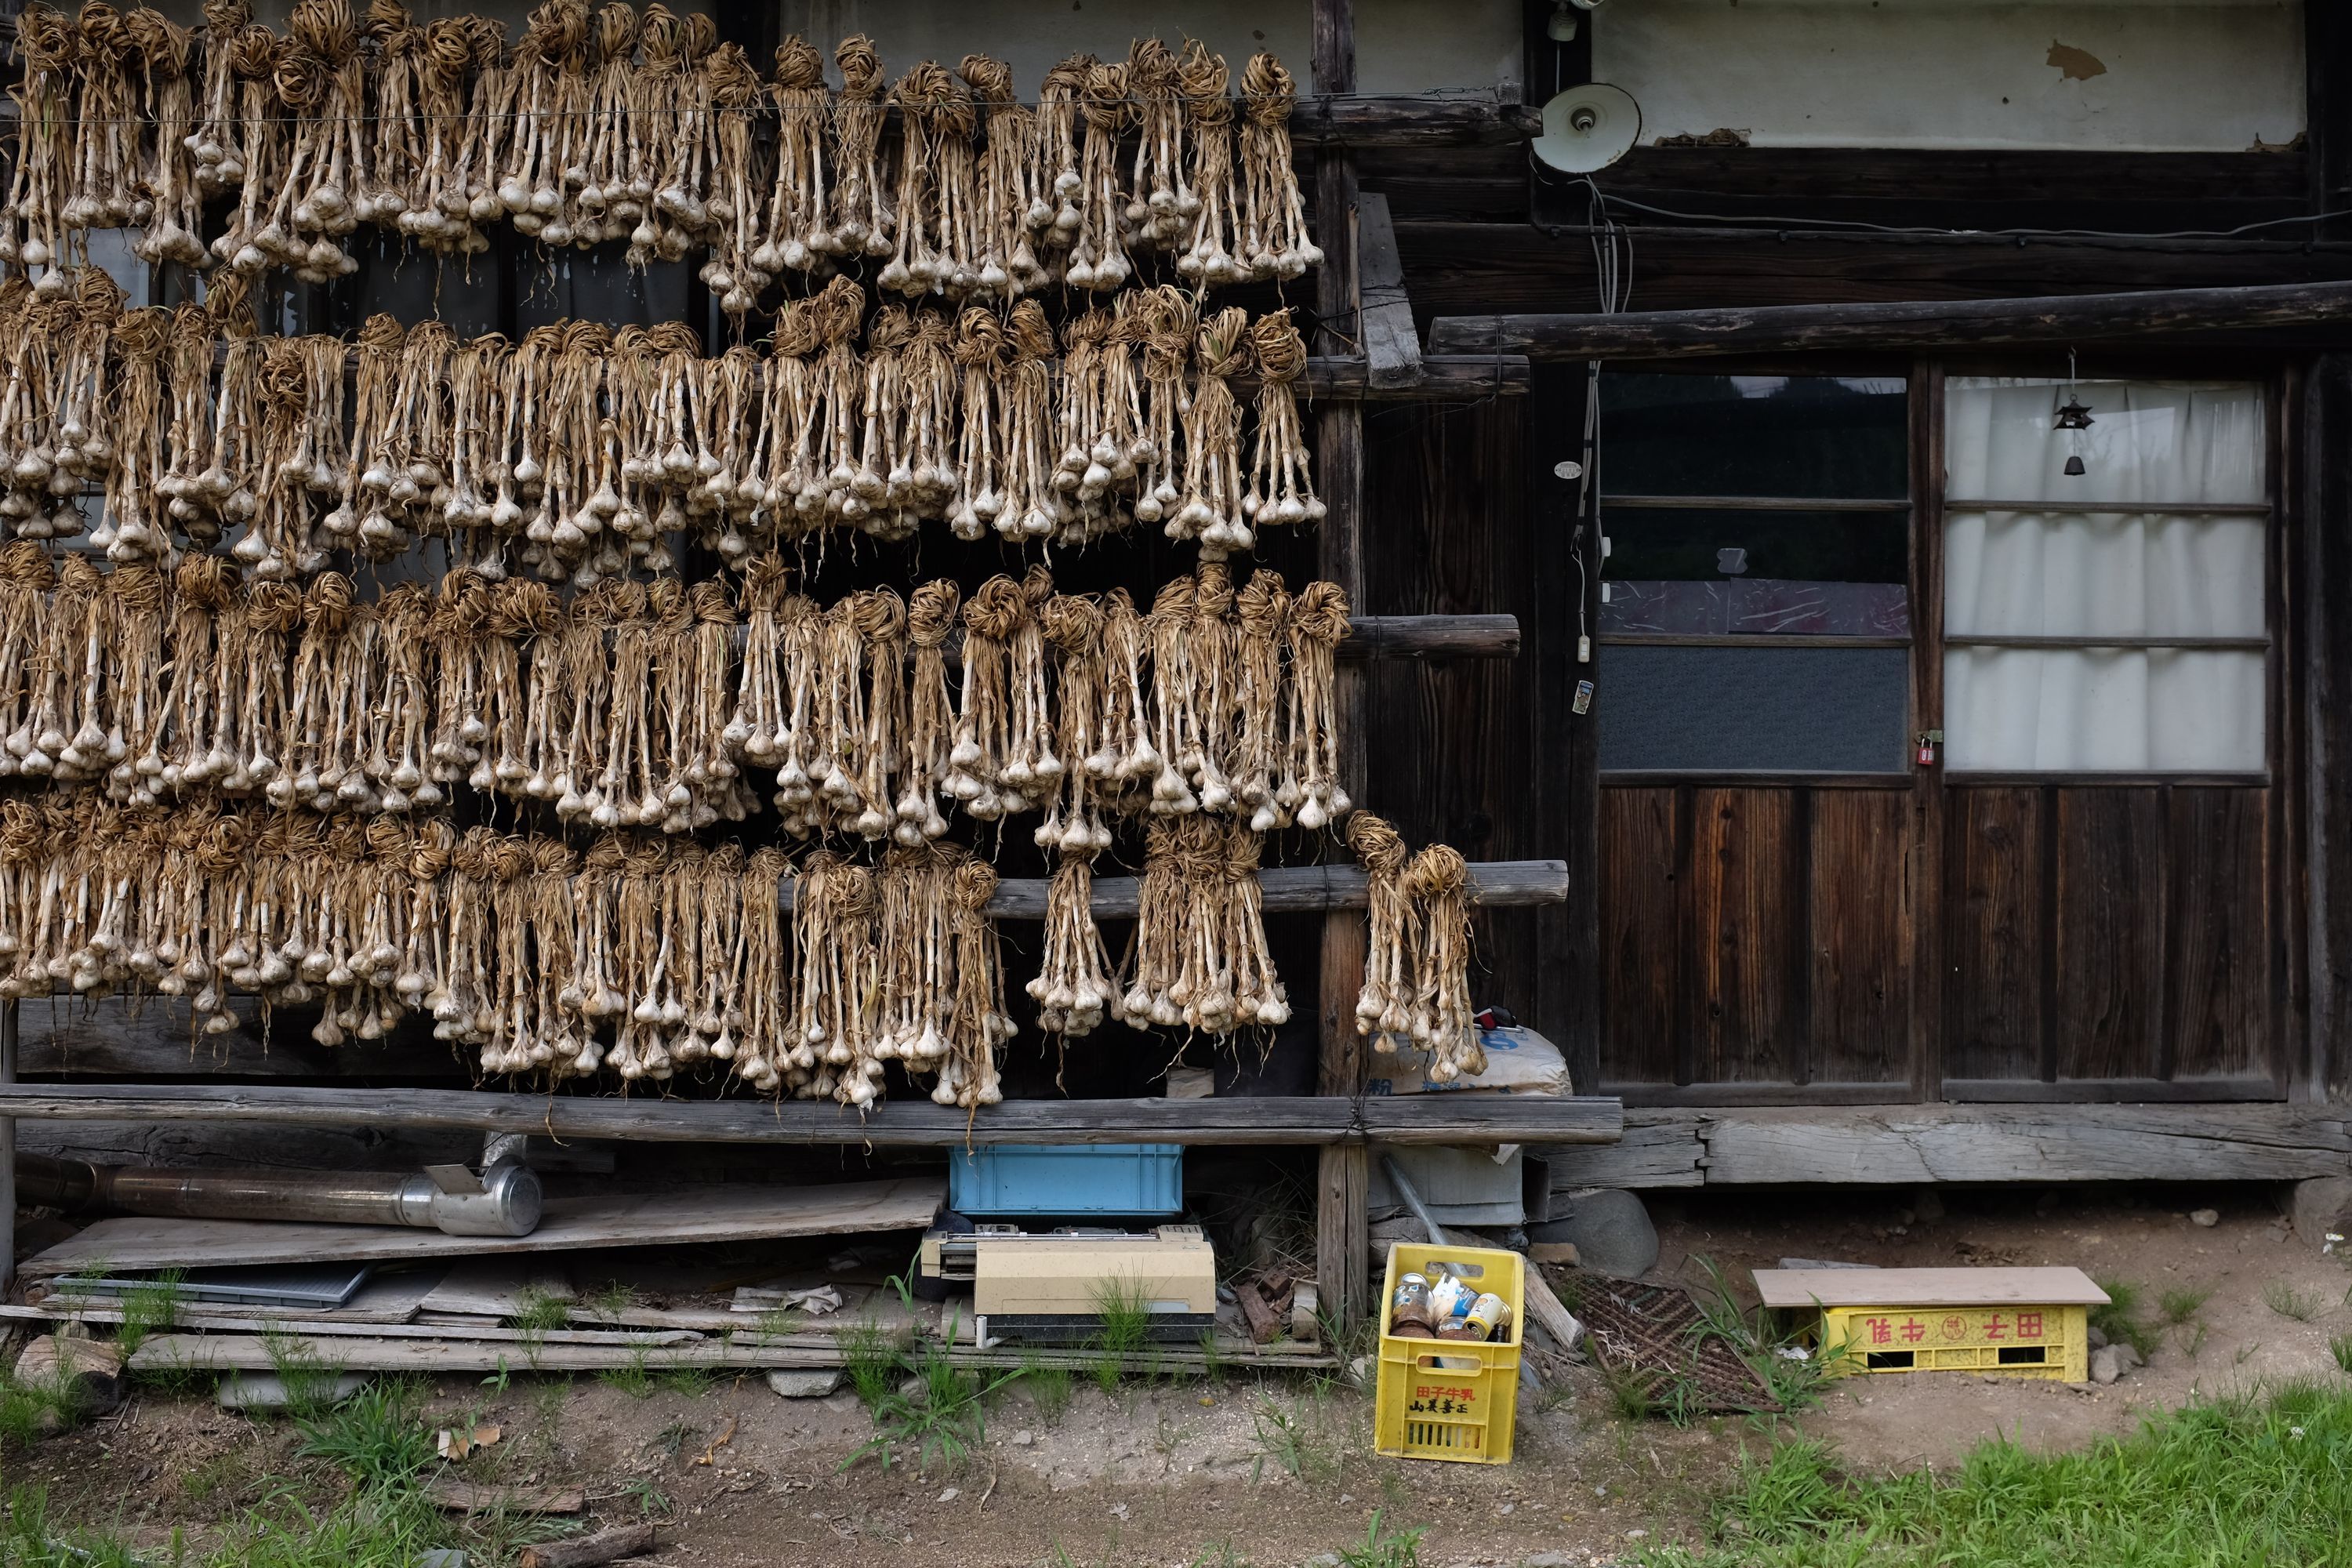 Braids of garlic drying on the outside wall of a house.